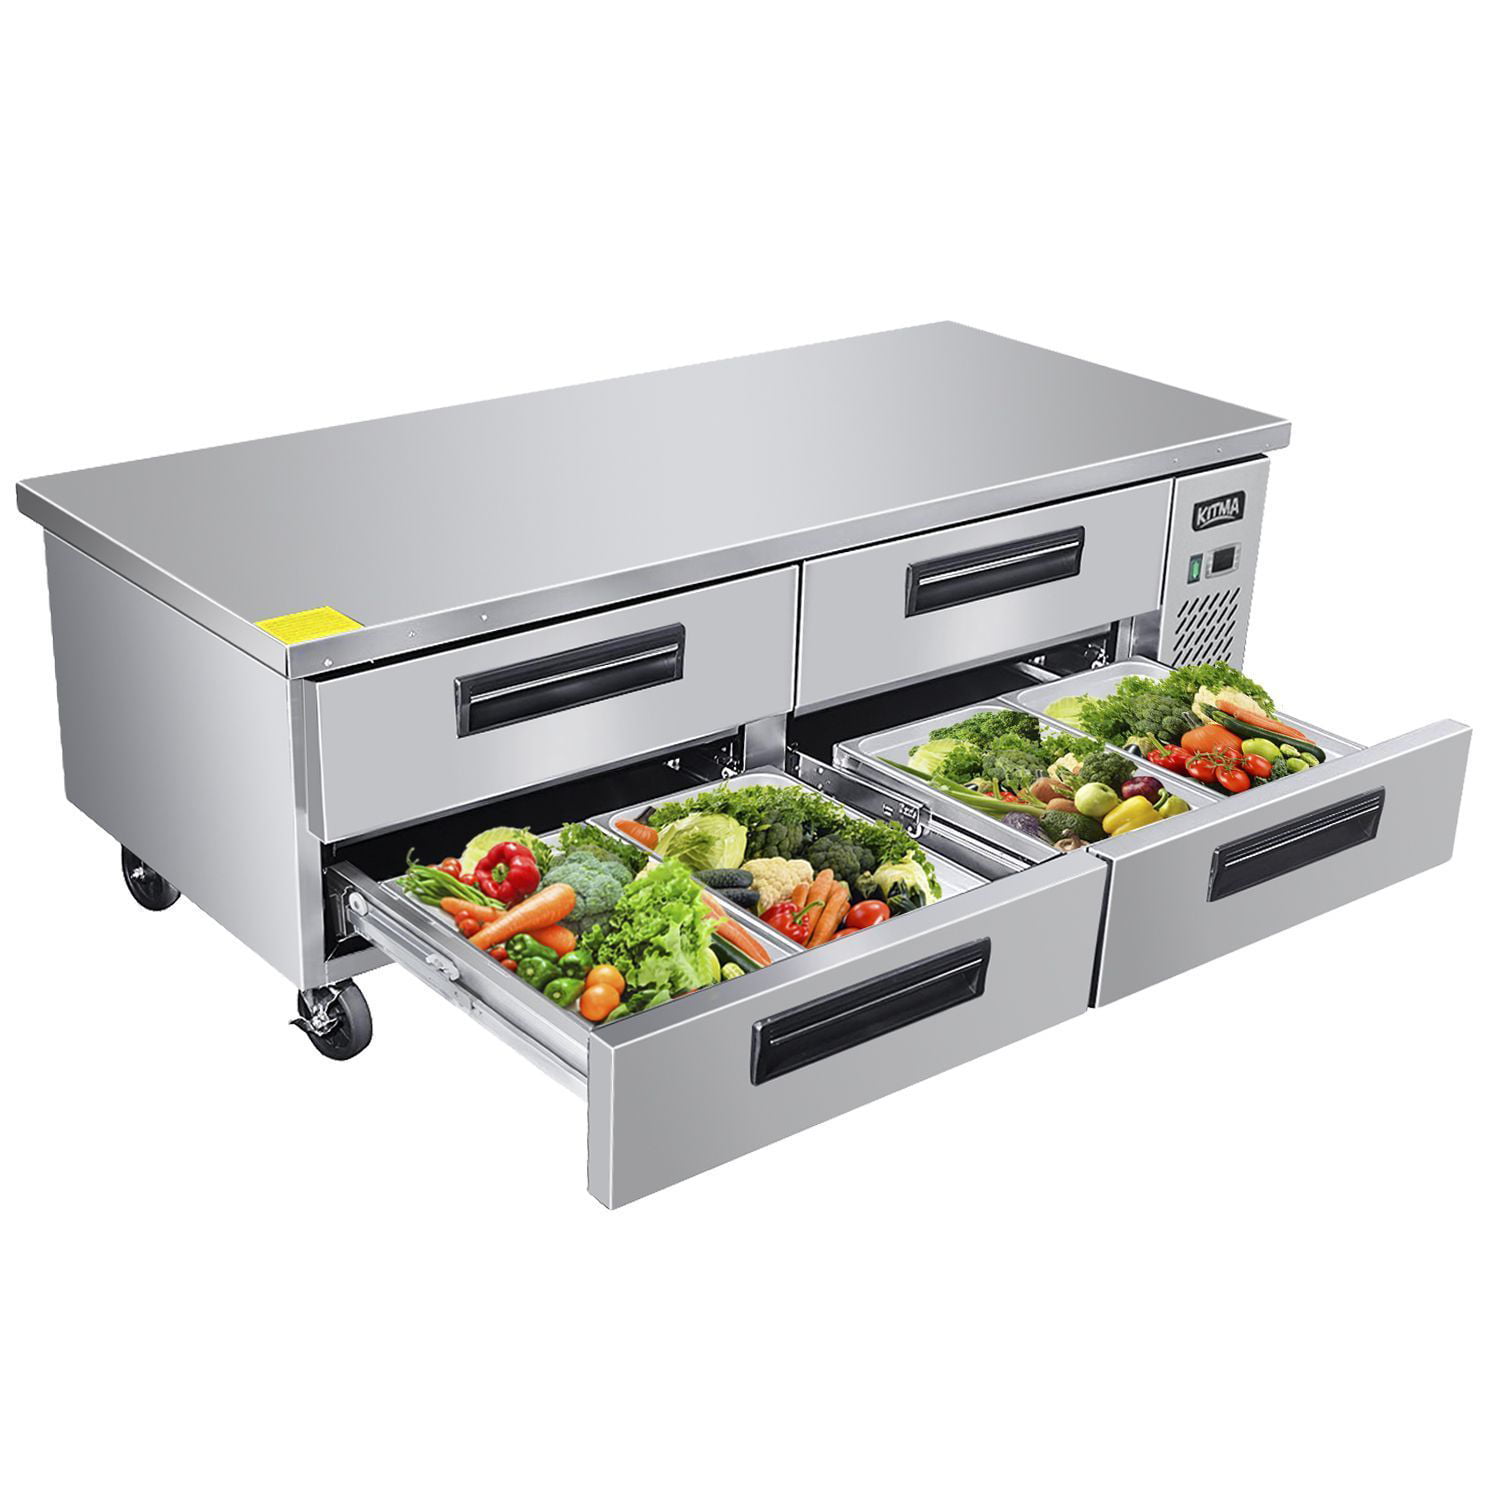 Drawered Refrigerator Kitchen Equipment with Drawers 33℉-38℉ Restaurant Refrigeration Equipment KITMA 10.4 Cu.Ft Stainless Steel Refrigerator 2 Drawers Commercial Refrigerated Chef Base 